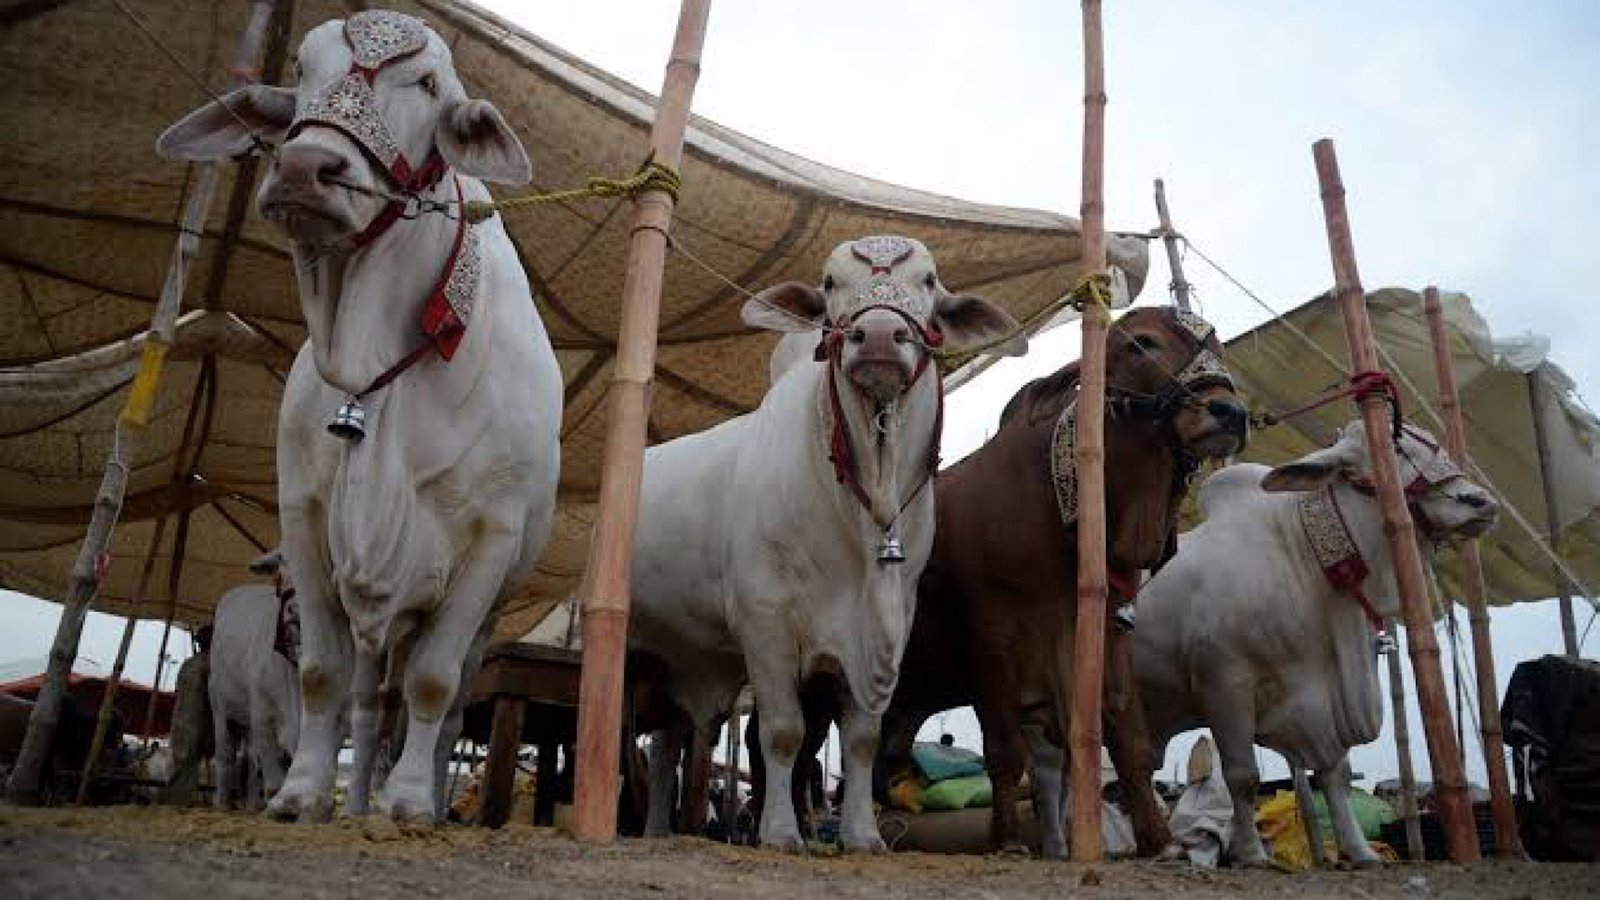 6 Cattle Markets Set to Open in Islamabad: Locations Revealed